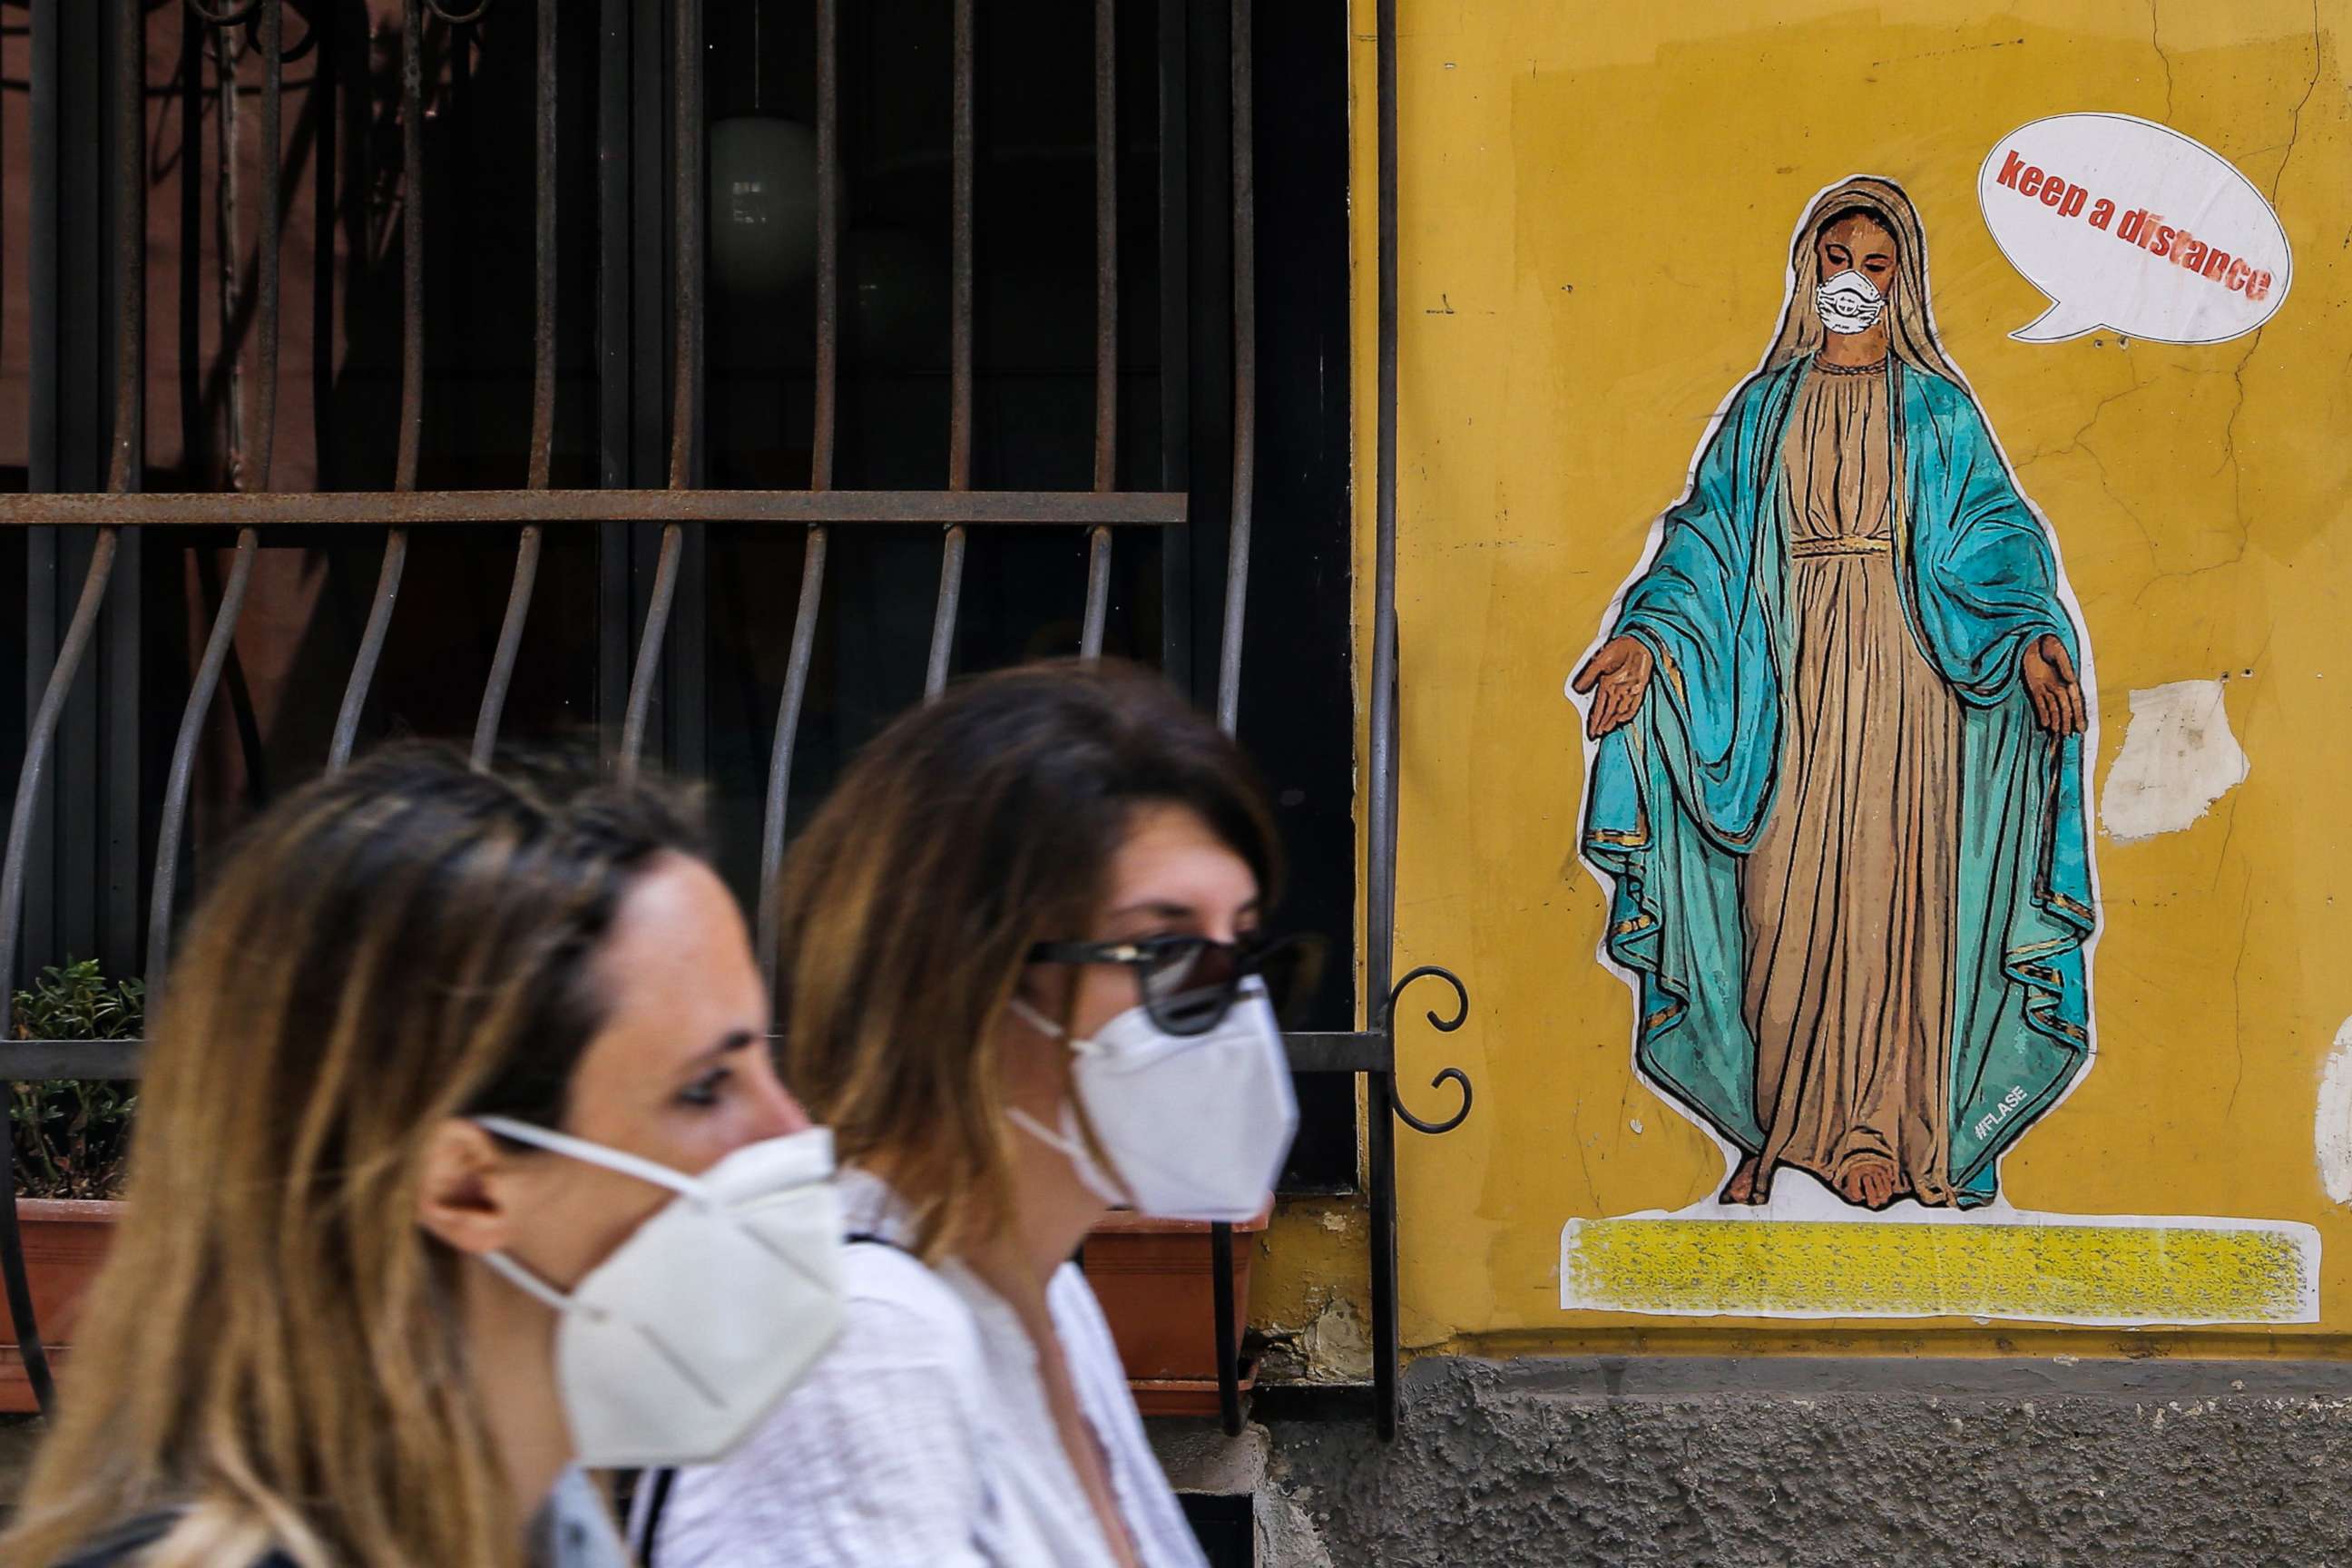 PHOTO: Women wearing a face masks walk past a mural by Art Flase depicting the Virgin Mary wearing a mask and saying "Keep a distance" in downtown Naples, Italy, on May 13, 2020.